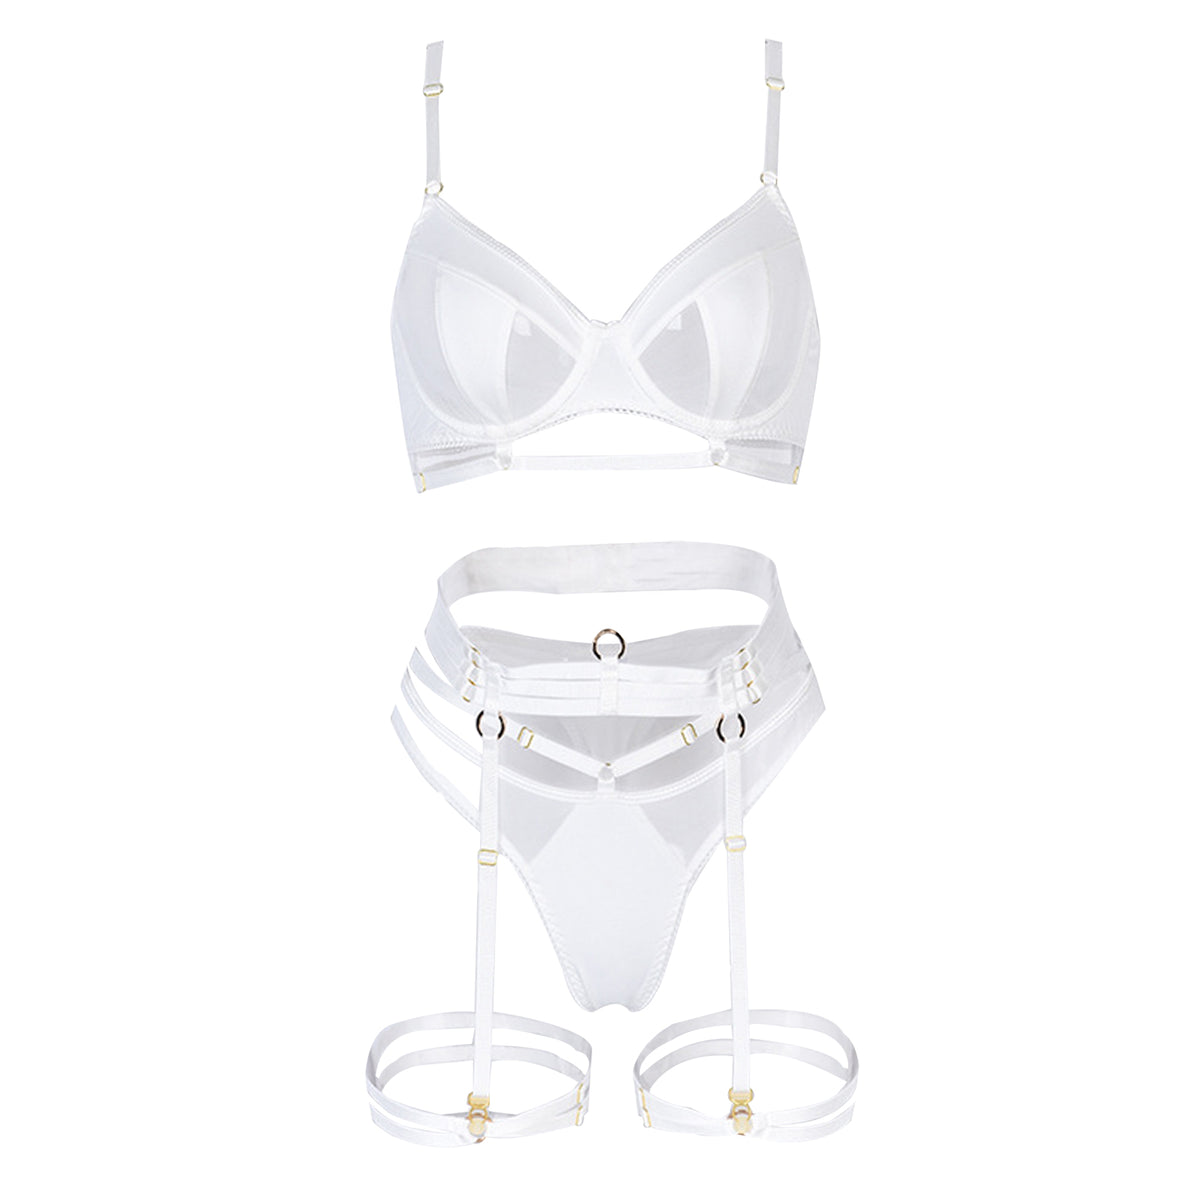 Yomorio Sexy Strappy Lingerie Set - Punk Style Mesh Bra and Panty